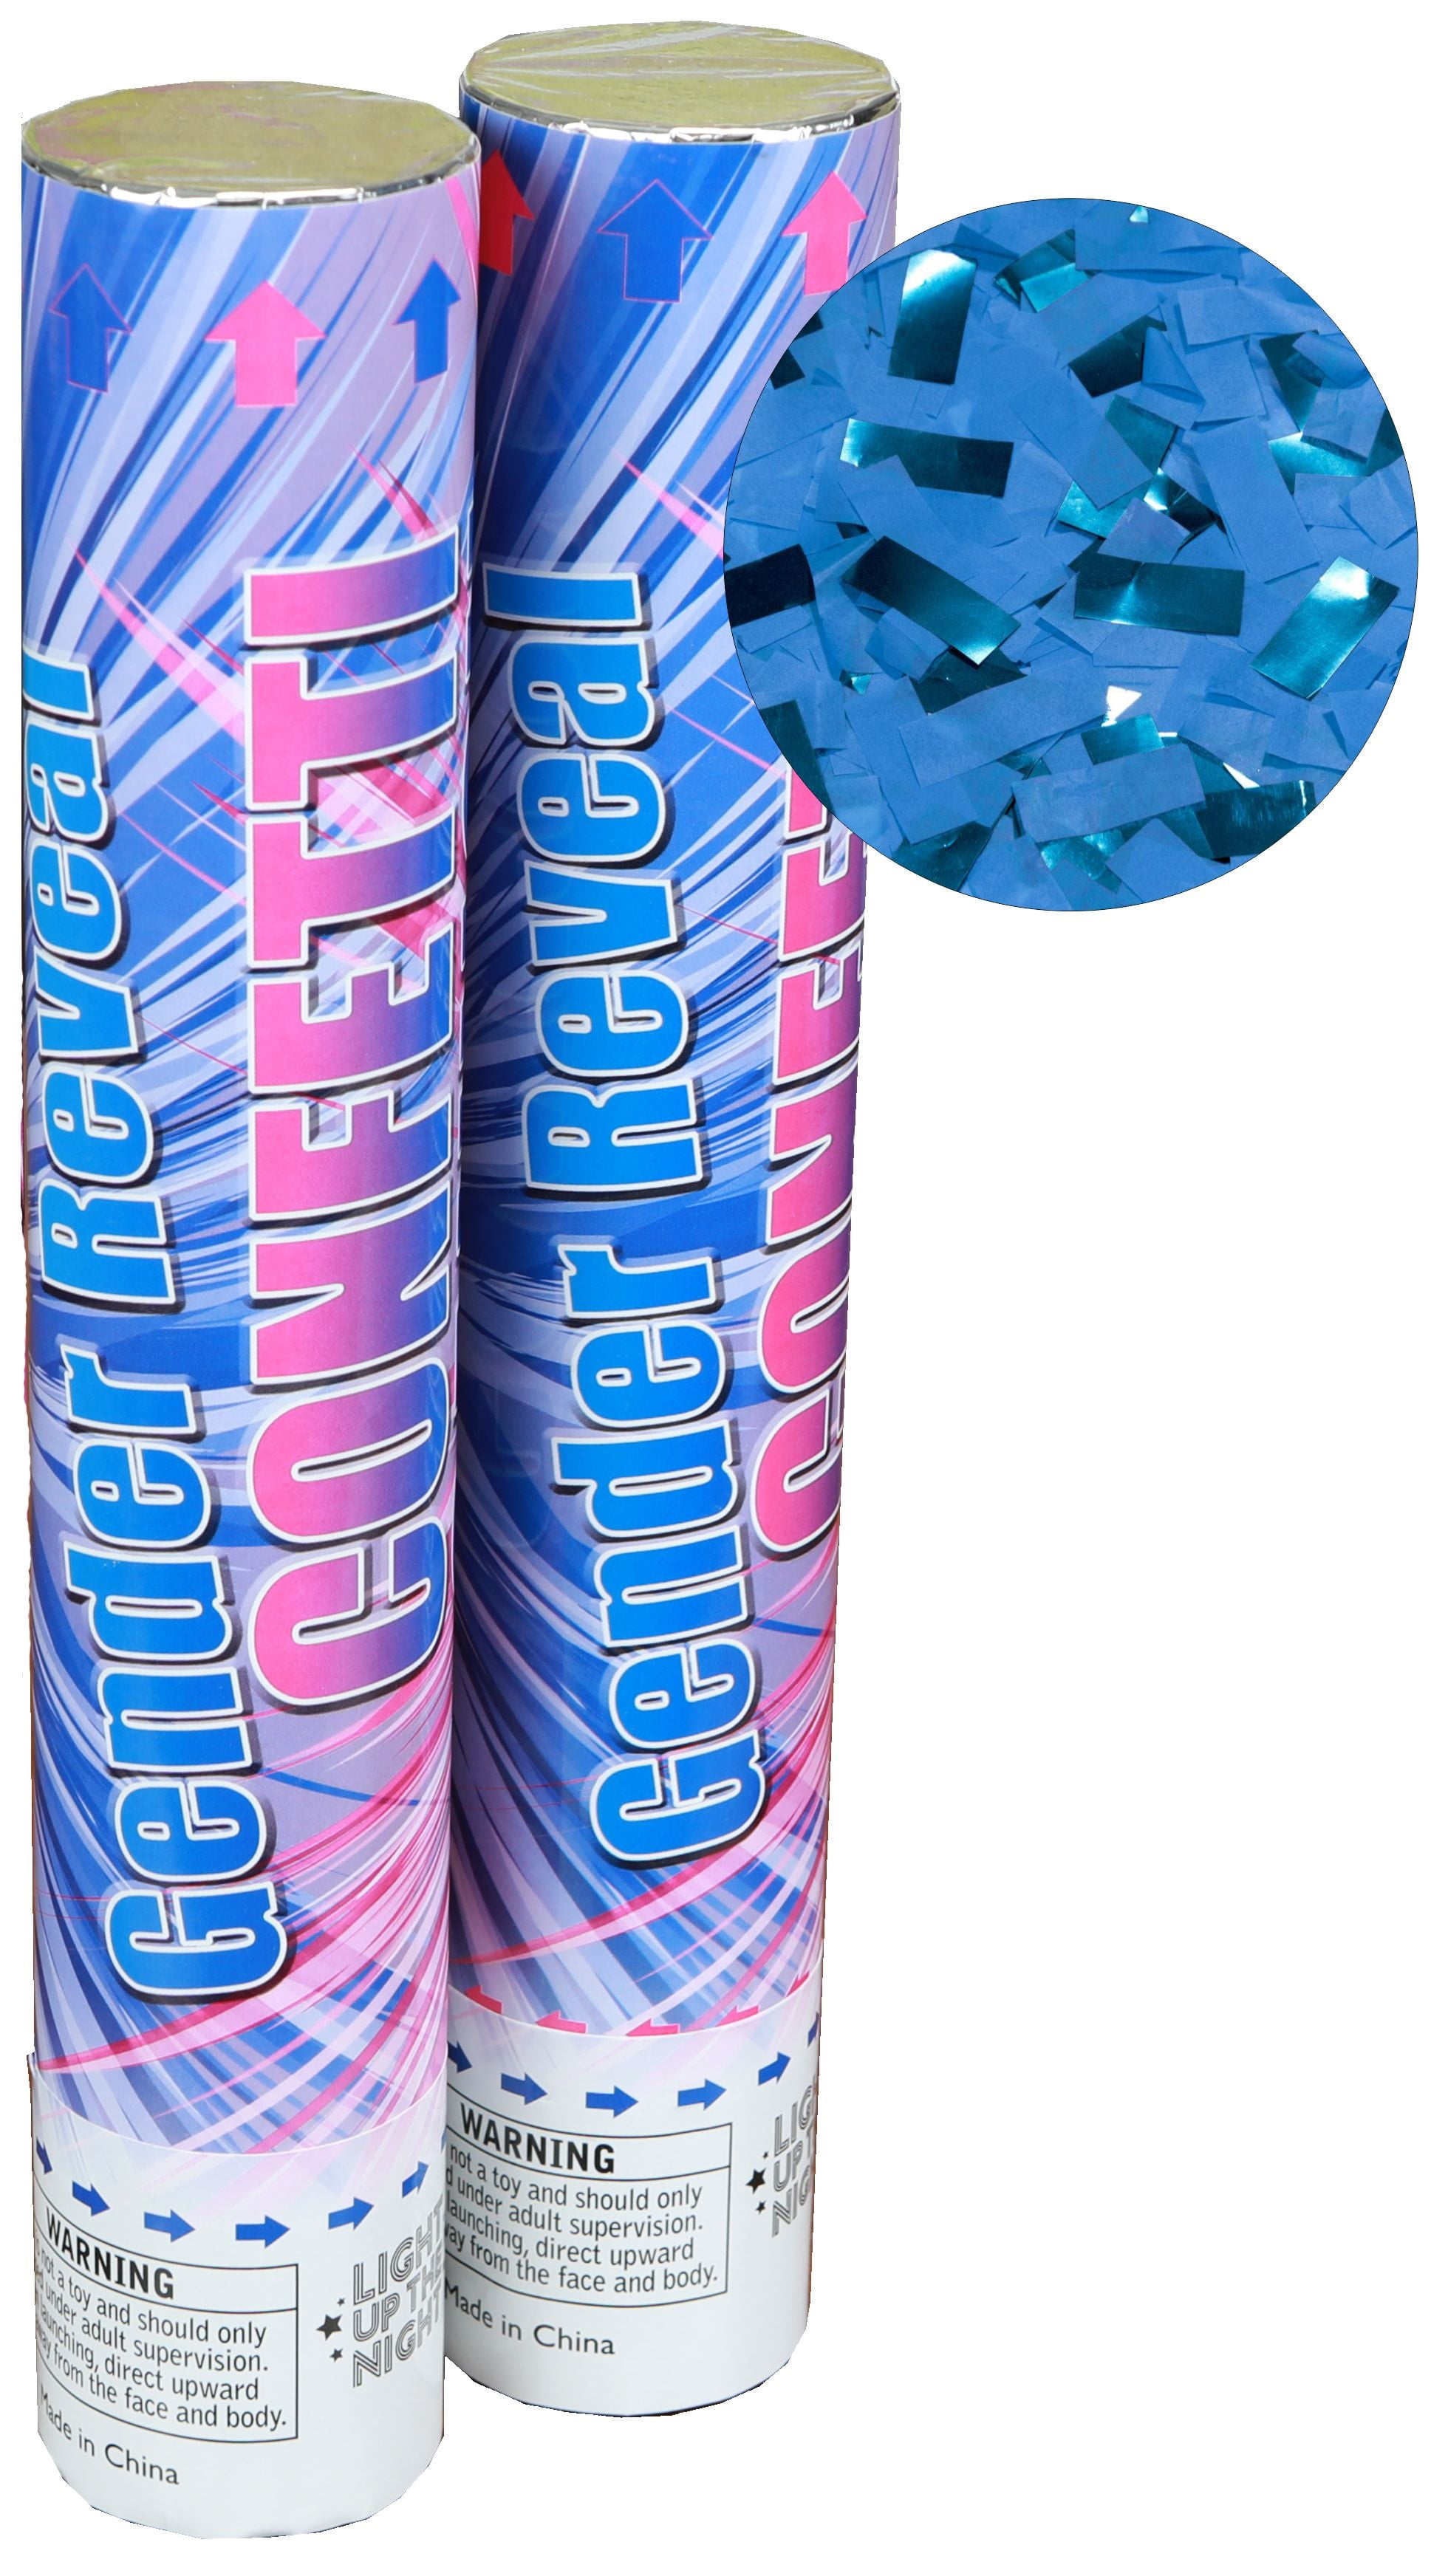 Bulk 12 x Giant Party Poppers Confetti Cannon Poppers Shoots up to 10 Meters 